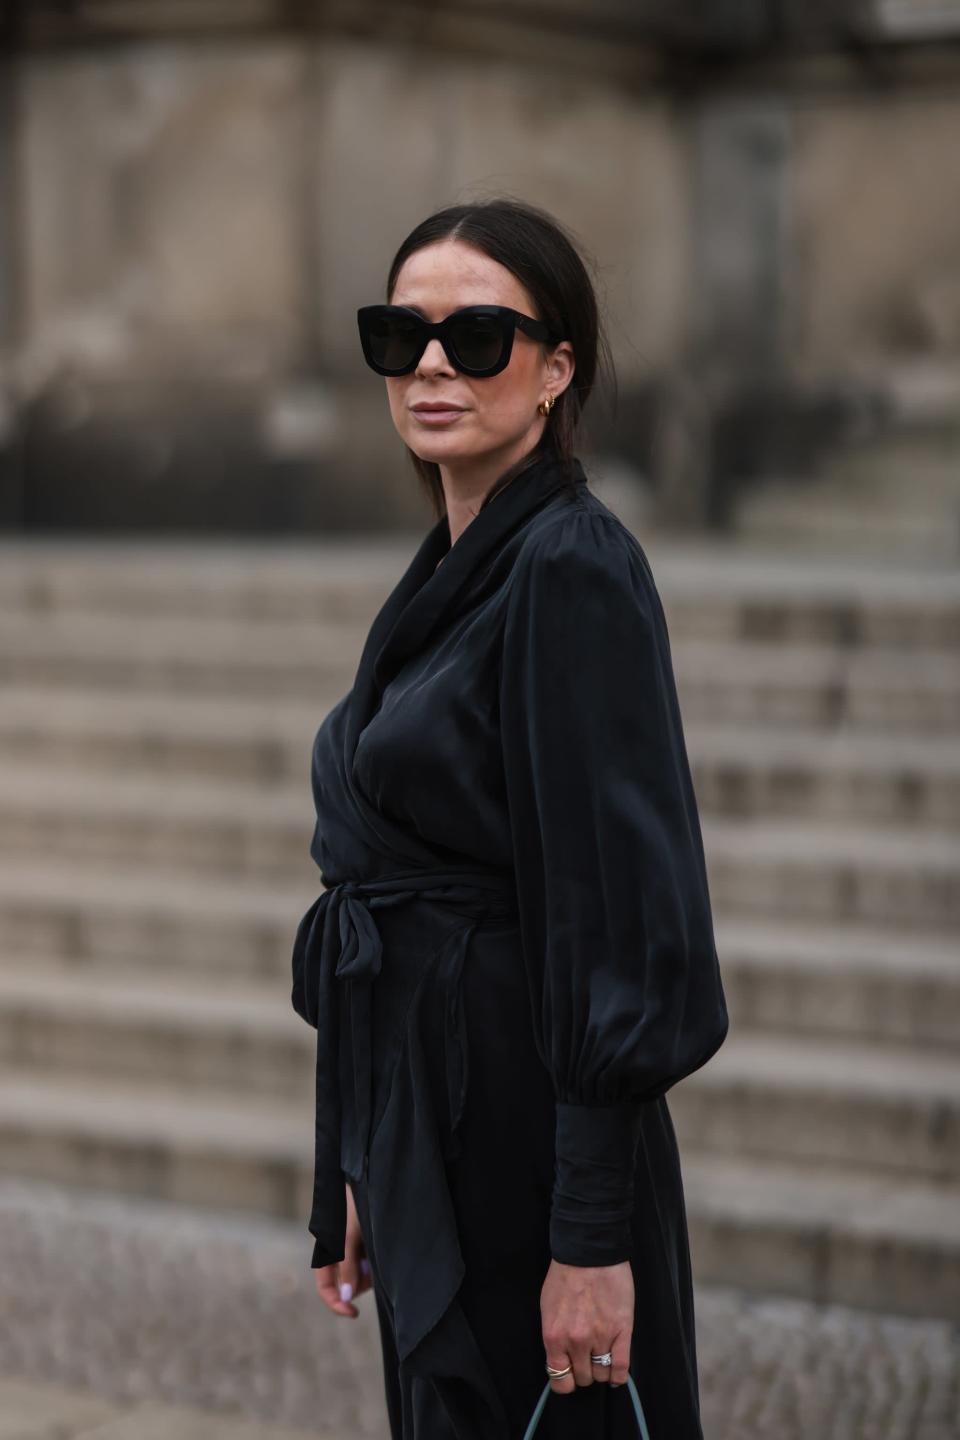 <p>Maldonado's suggestions for funeral clothing is specific: "Think simple, severe, and somber. A sheath or architectural silhouette works well, but avoid anything flirty or joyful, such as an A-line or fit-and-flare." She recommends scanning Farfetch and Net-a-Porter for higher-end labels like Alexander McQueen, Rick Owens, and Ann Demeulemeester, or shopping COS, Banana Republic, and Zara for lower price points. Forbes-Bell also makes a case for browsing your own closet before making any purchases for emotional reasons. "People might find solace in wearing pieces they already own, ones that are drenched in symbolism, or a brand that they already have a connection with," she says.</p>